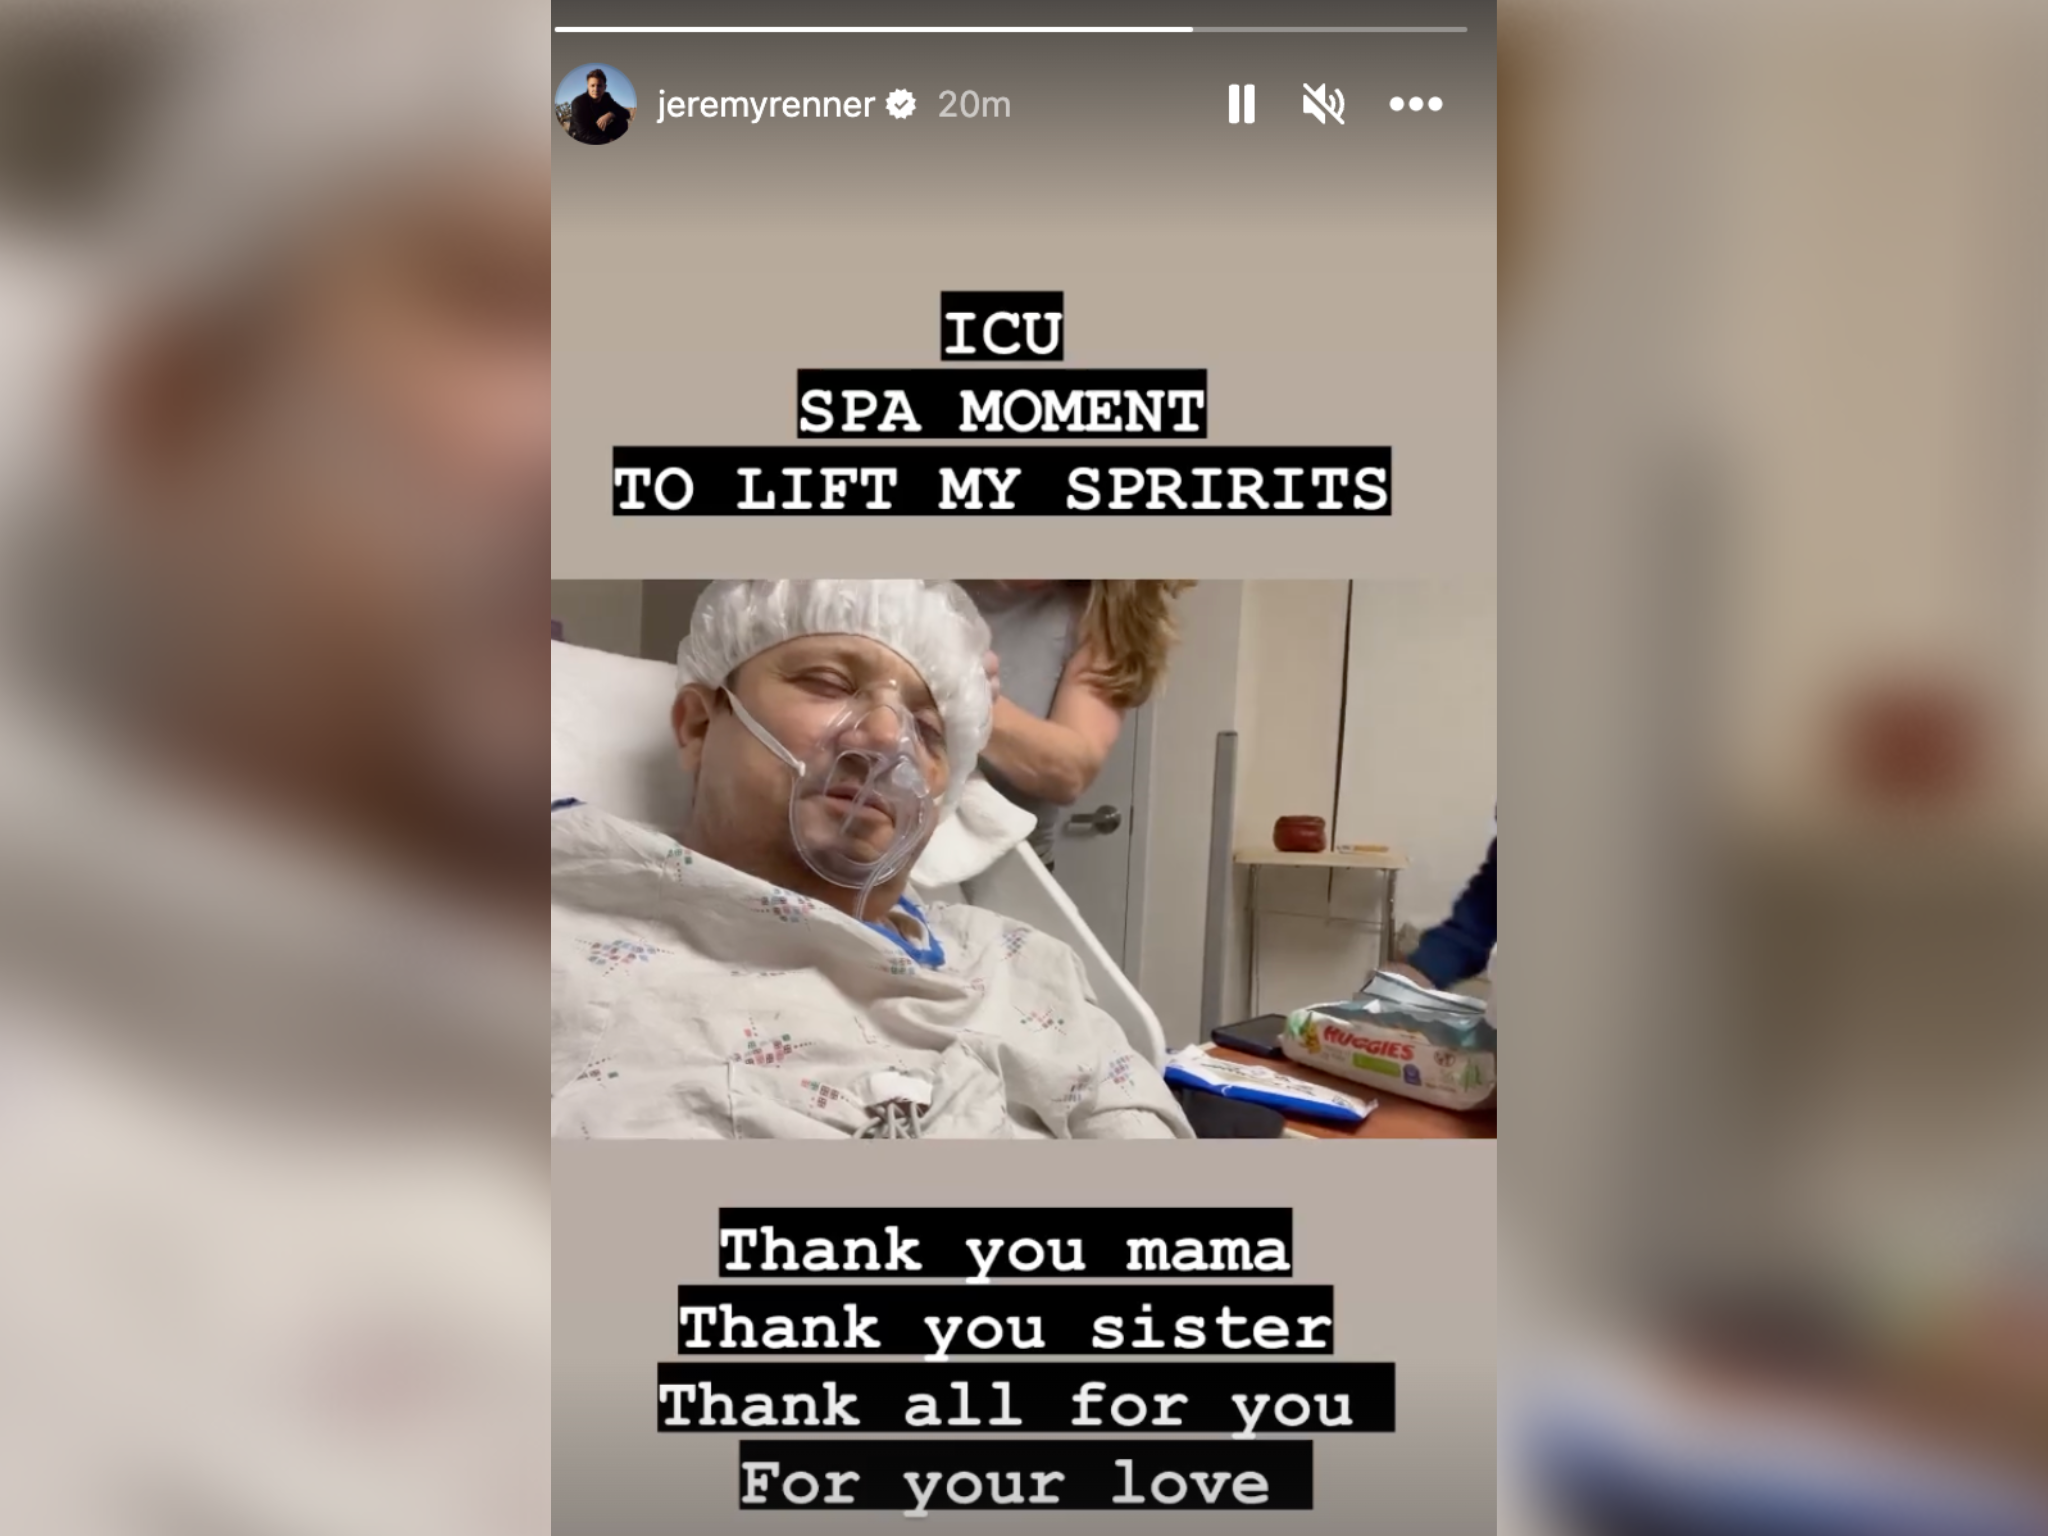 Jeremy Renner shares footage of an ‘ICU spa moment’ with family